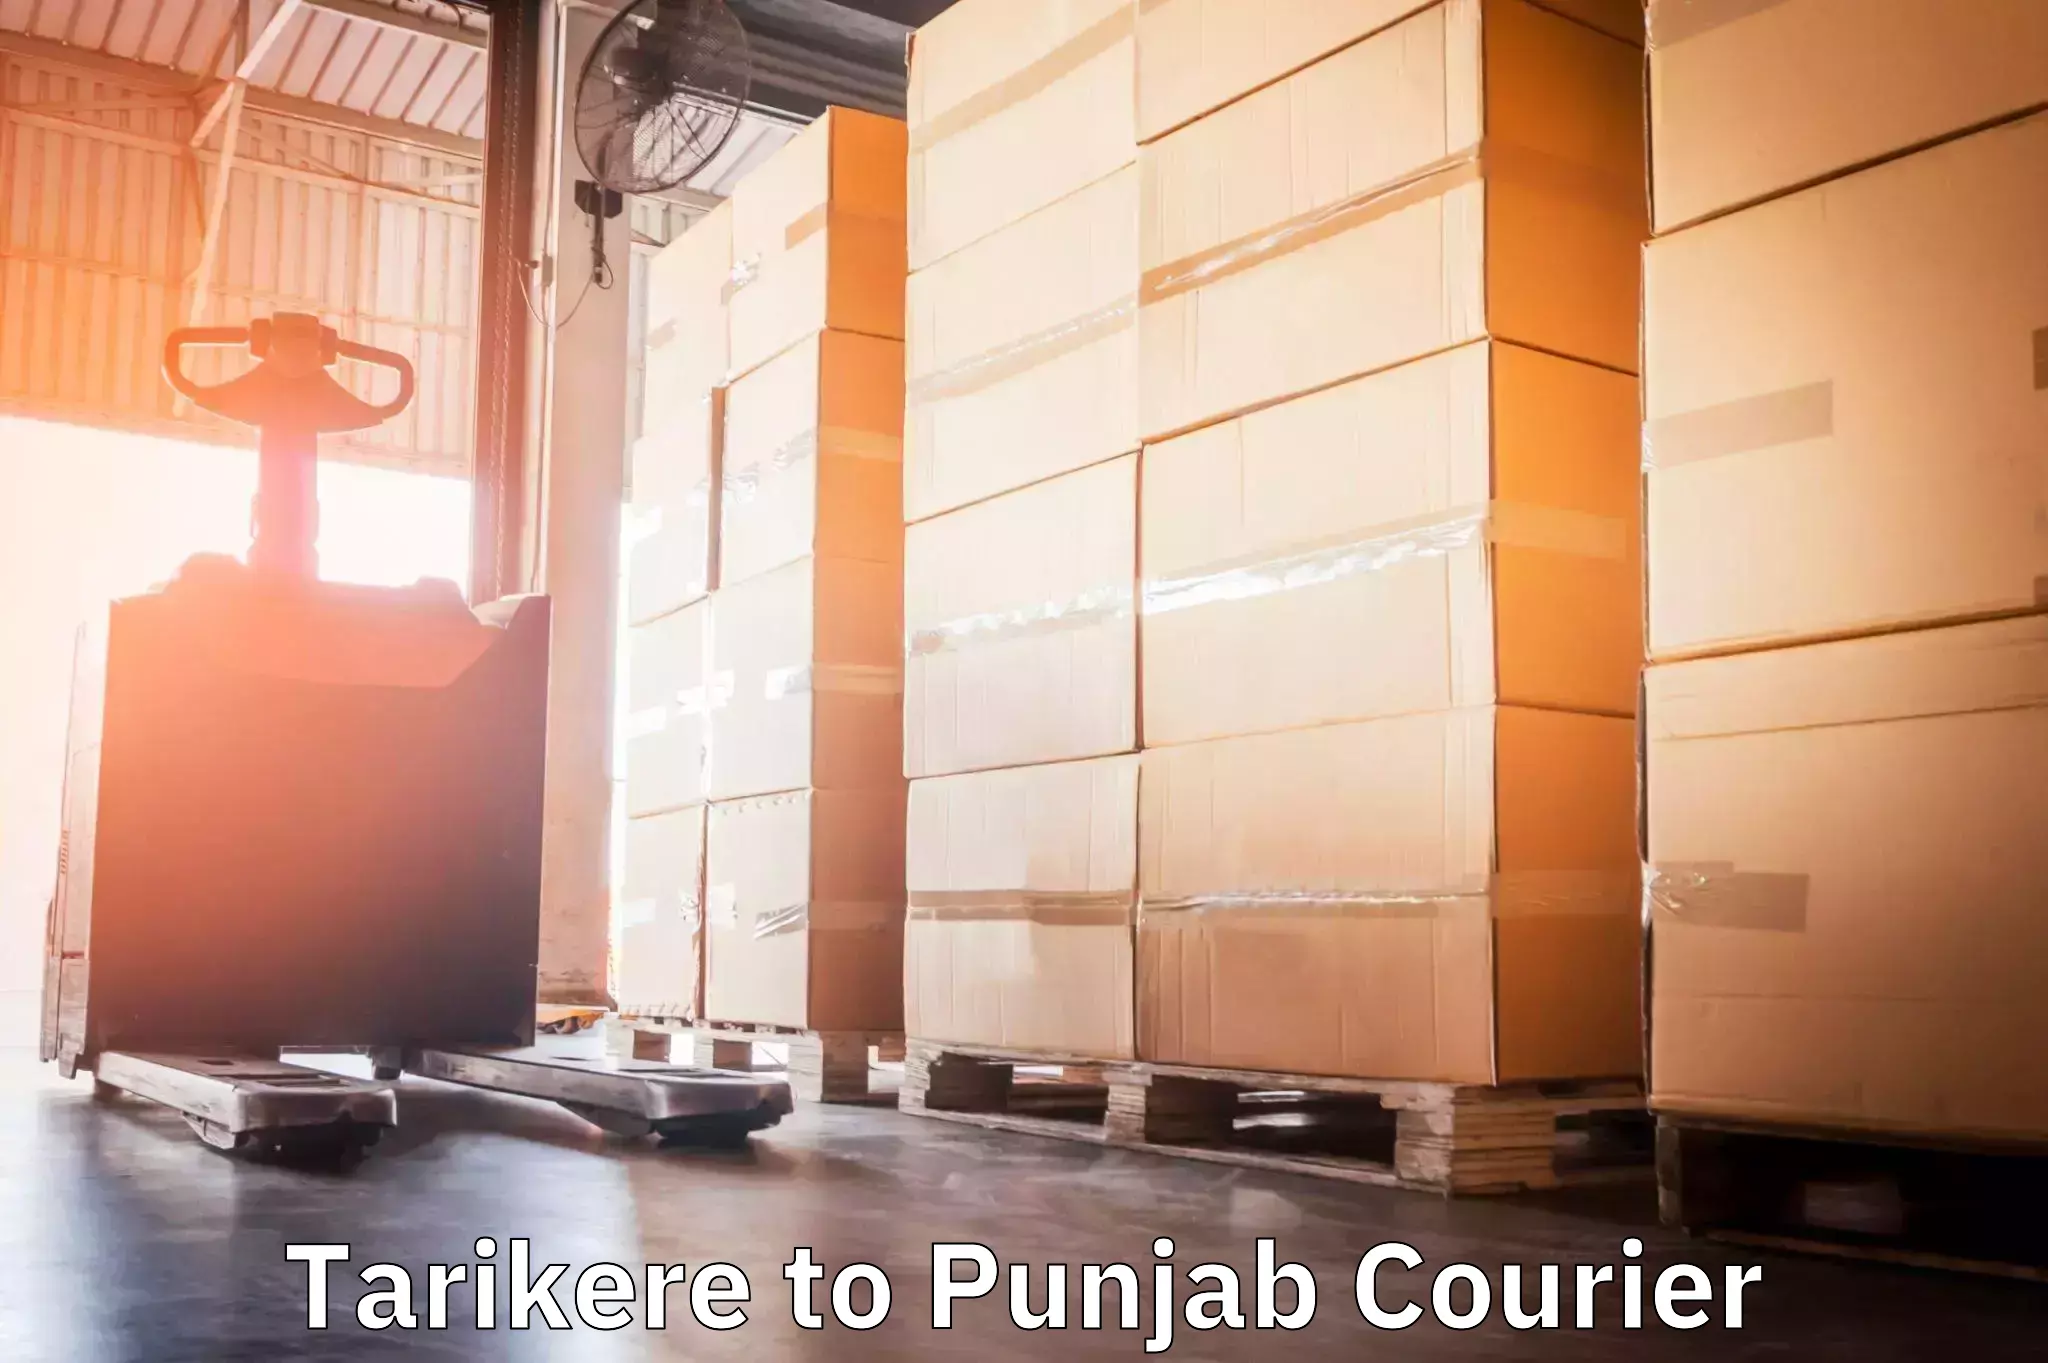 Next-day freight services Tarikere to IIT Ropar